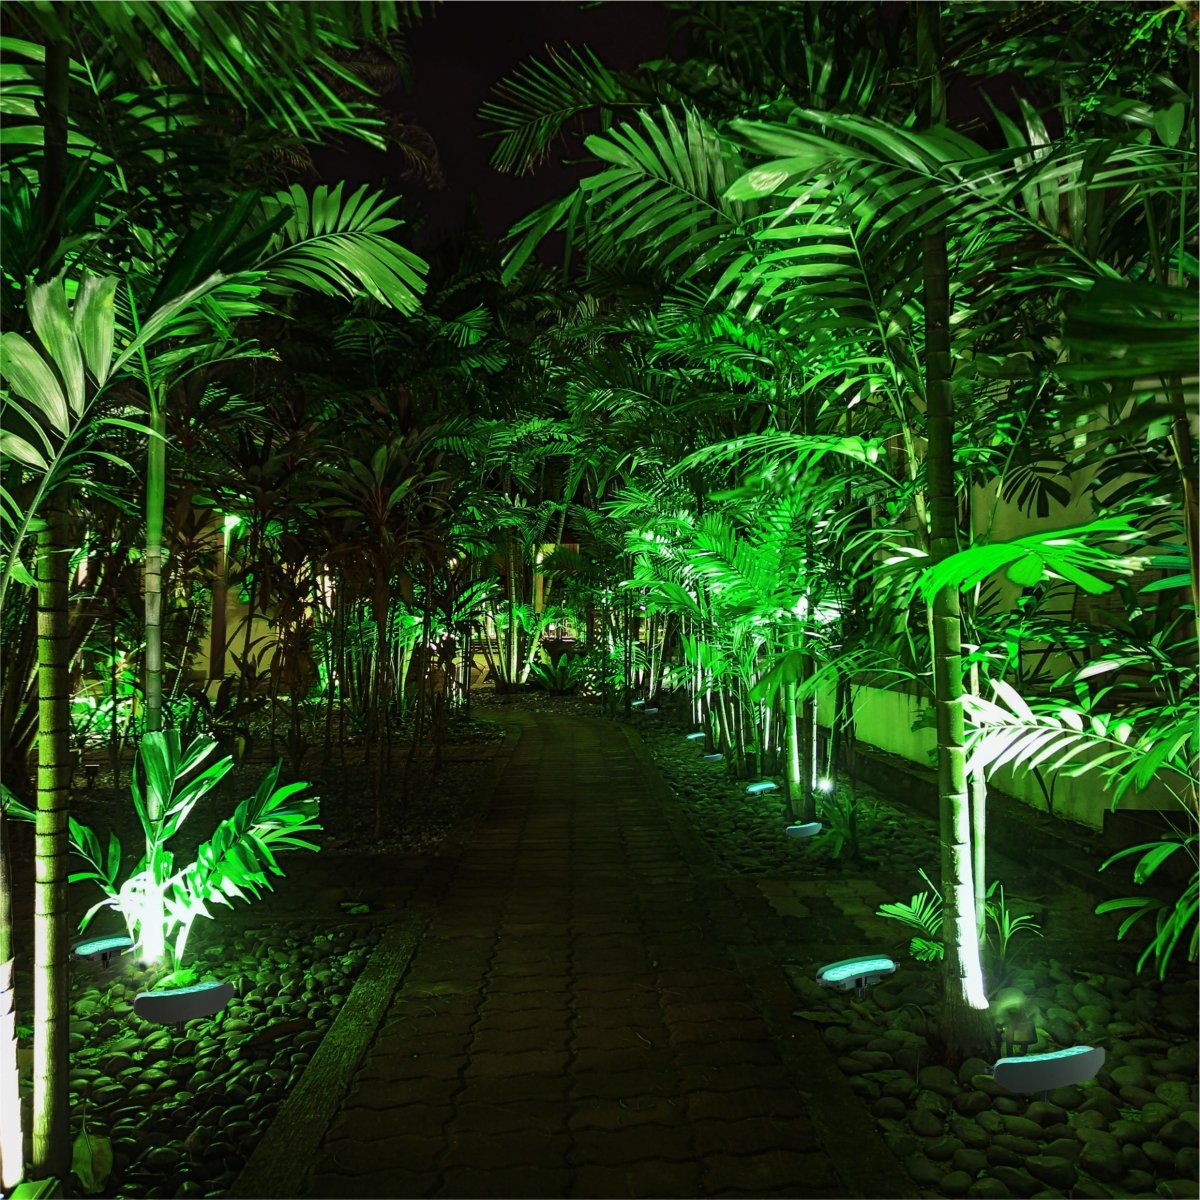 Outdoor usage of Tree Washer LED Floodlight 12W 3000K Warm White or Green | TEKLED 224-03156 pathway